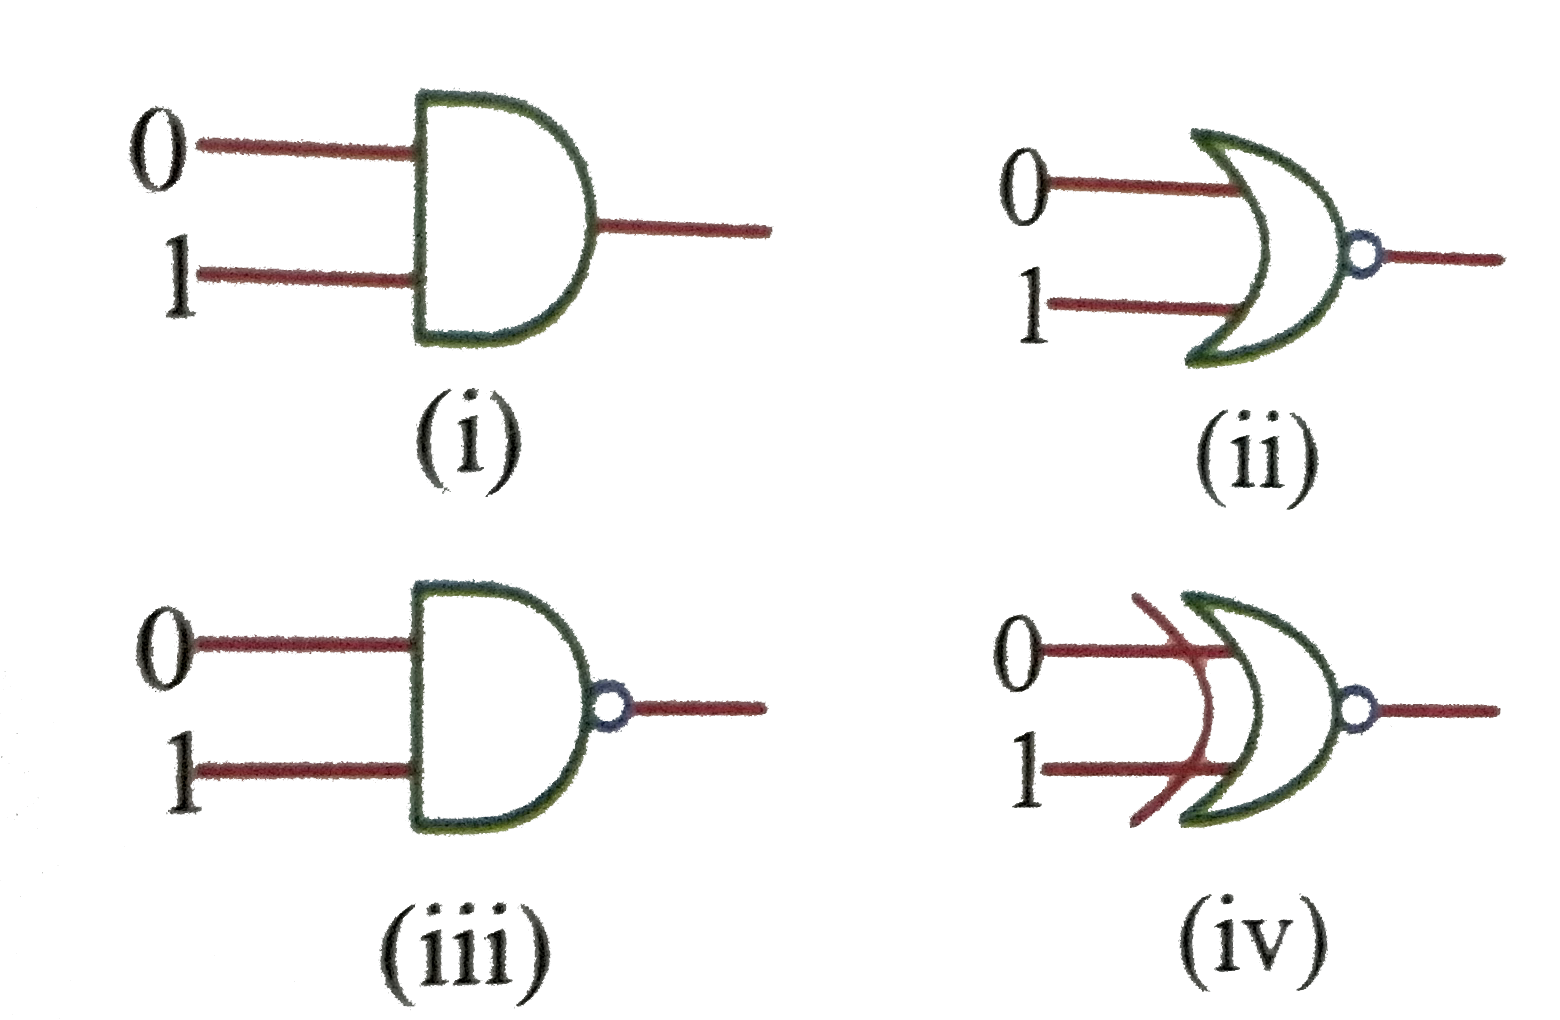 The logic gate having an output of 1 is.   (i)